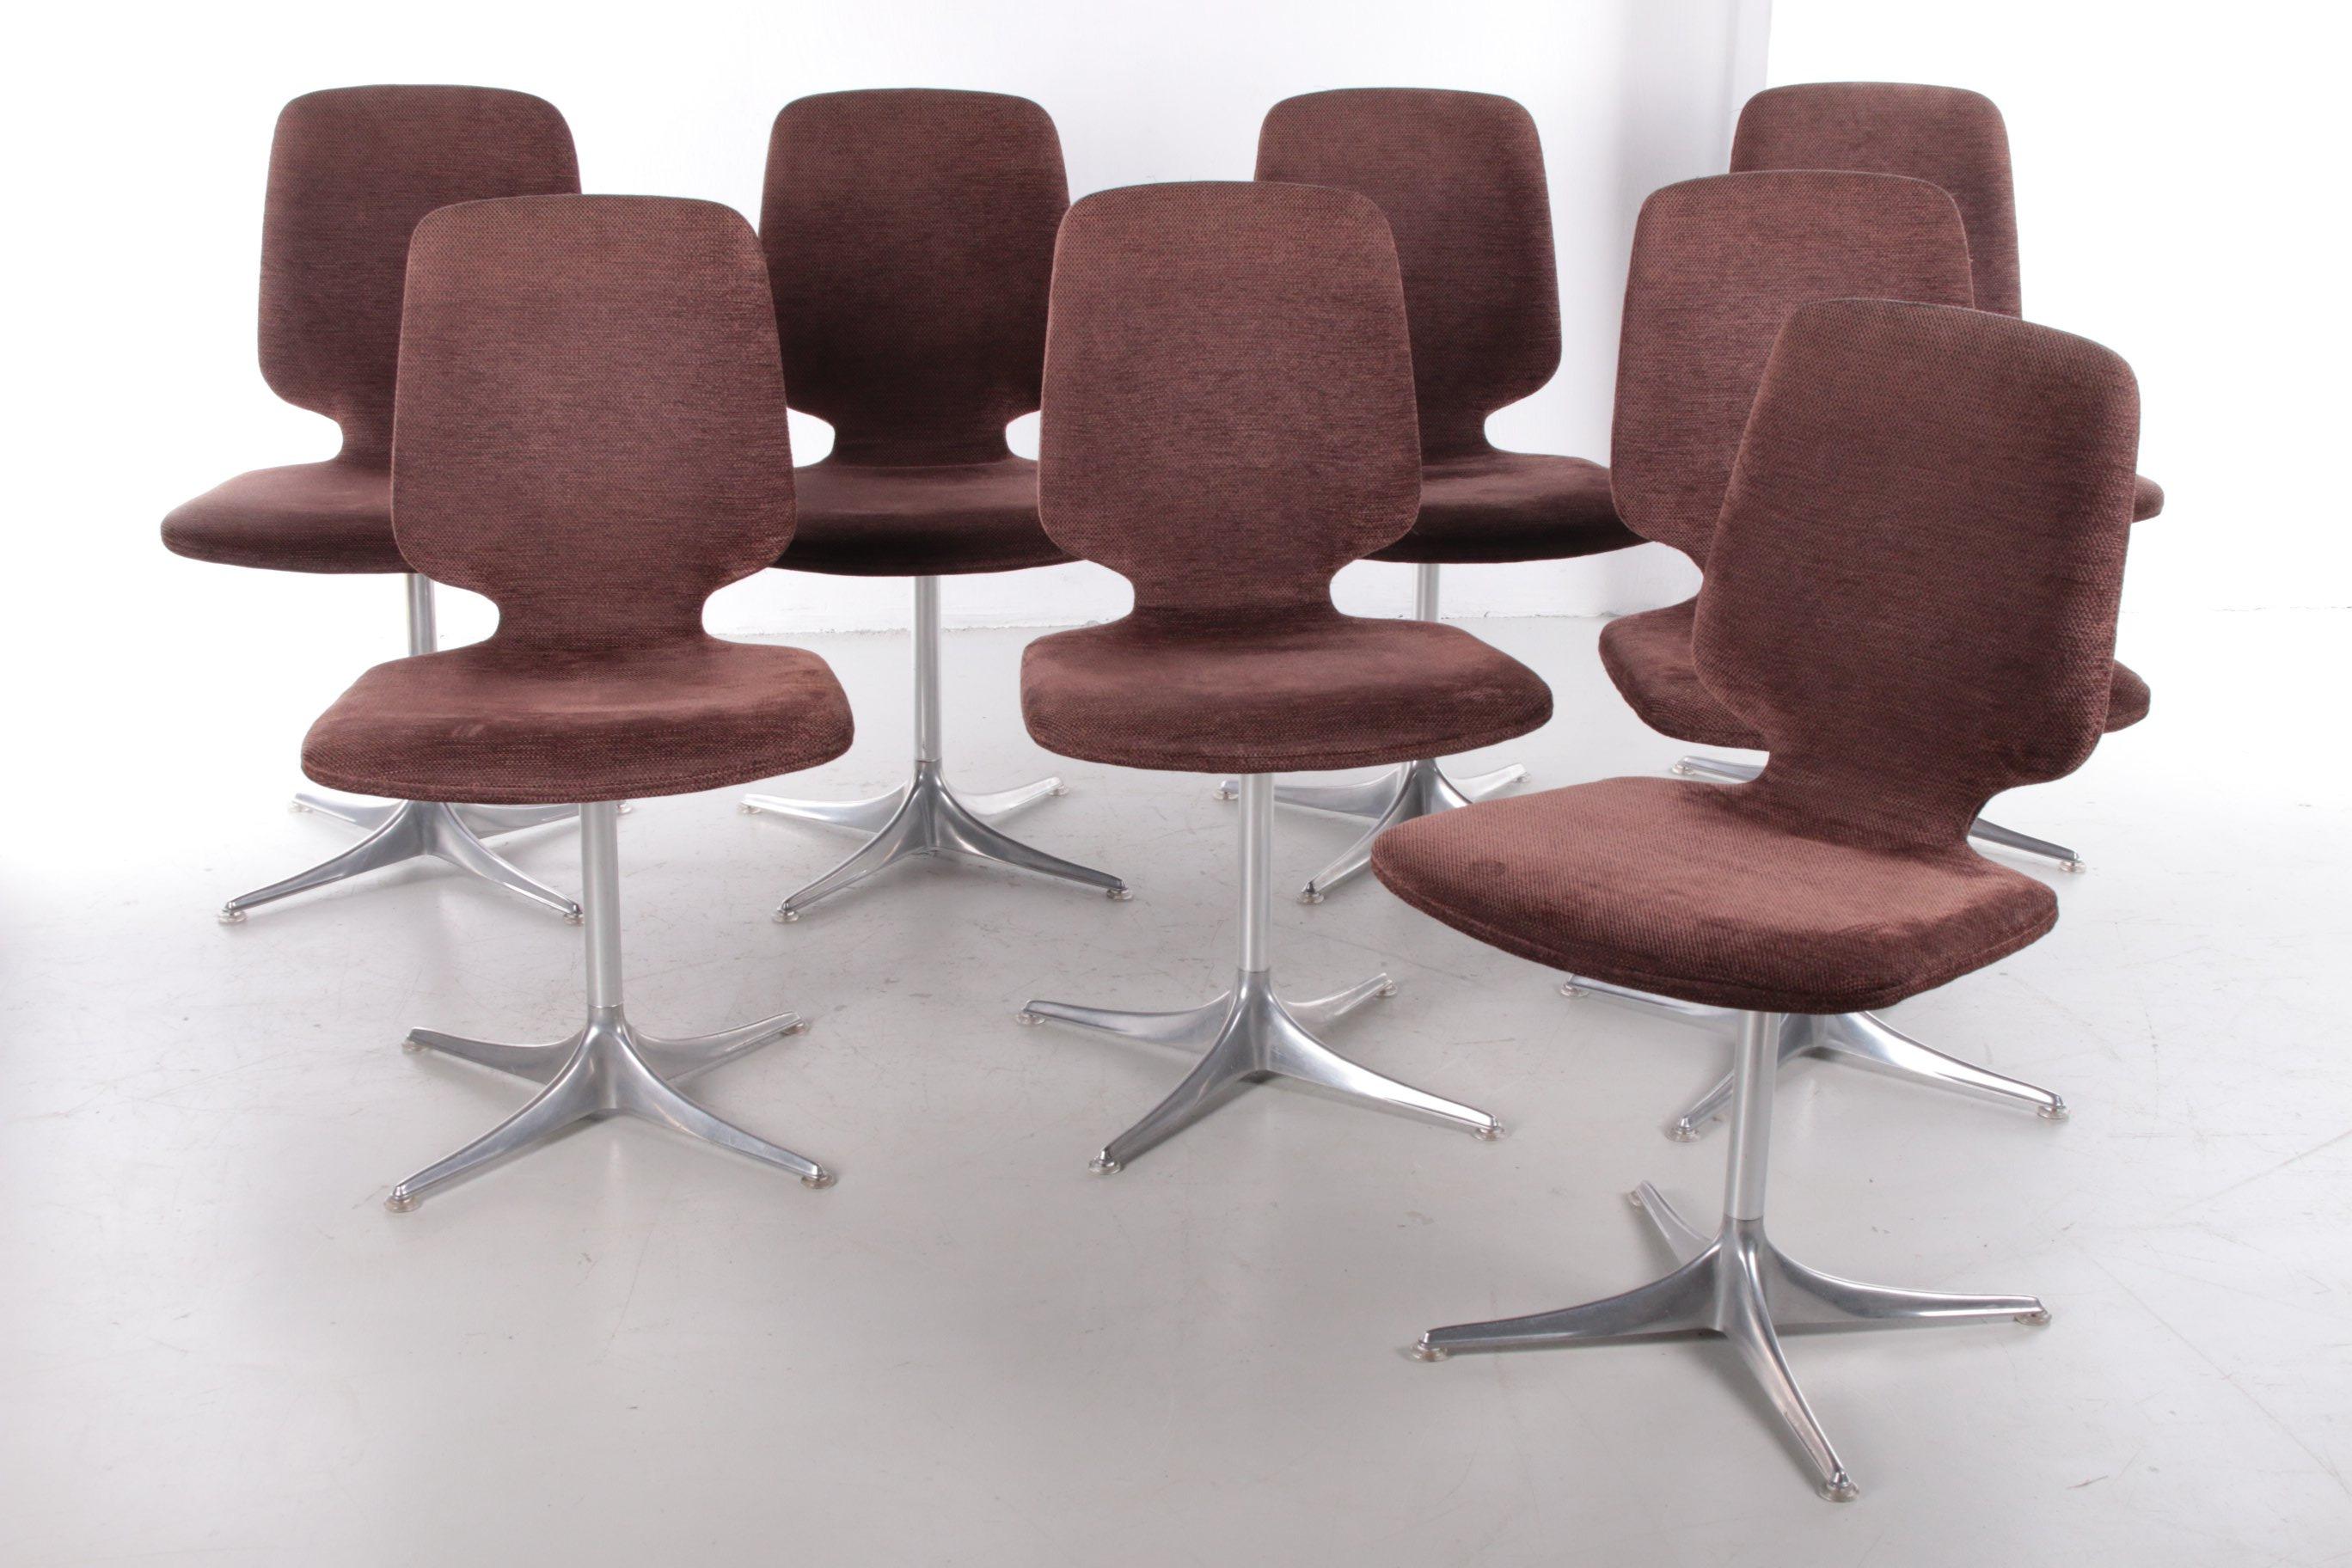 Set of 8 Chairs with Table by Horst Bruning Chair Model Sedia for COR For Sale 9